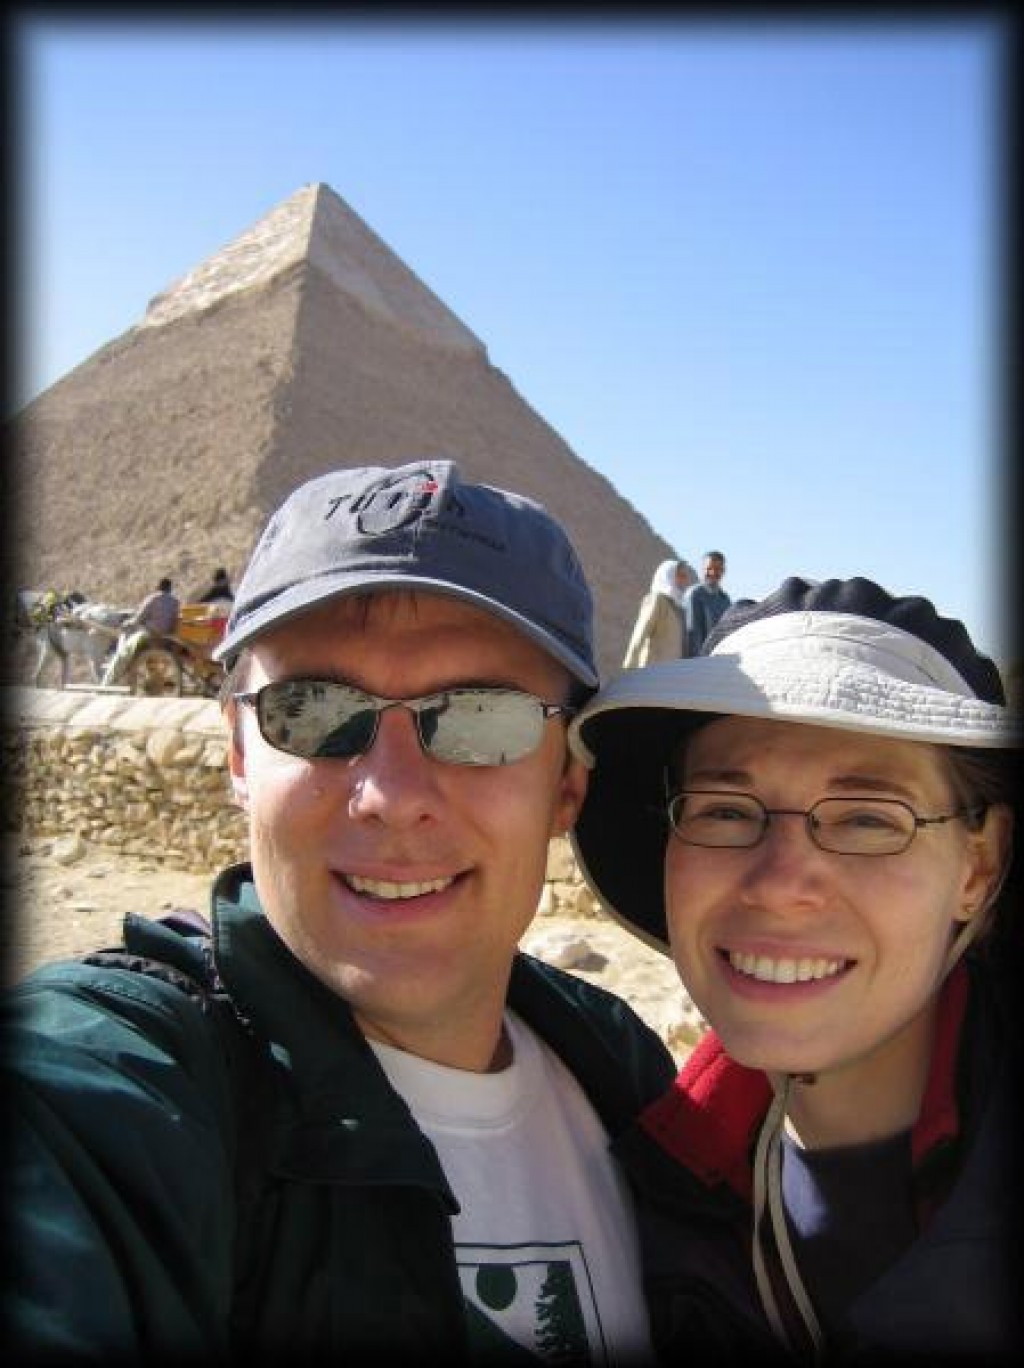 We visited the Pyramids of Giza outside of Cairo.  